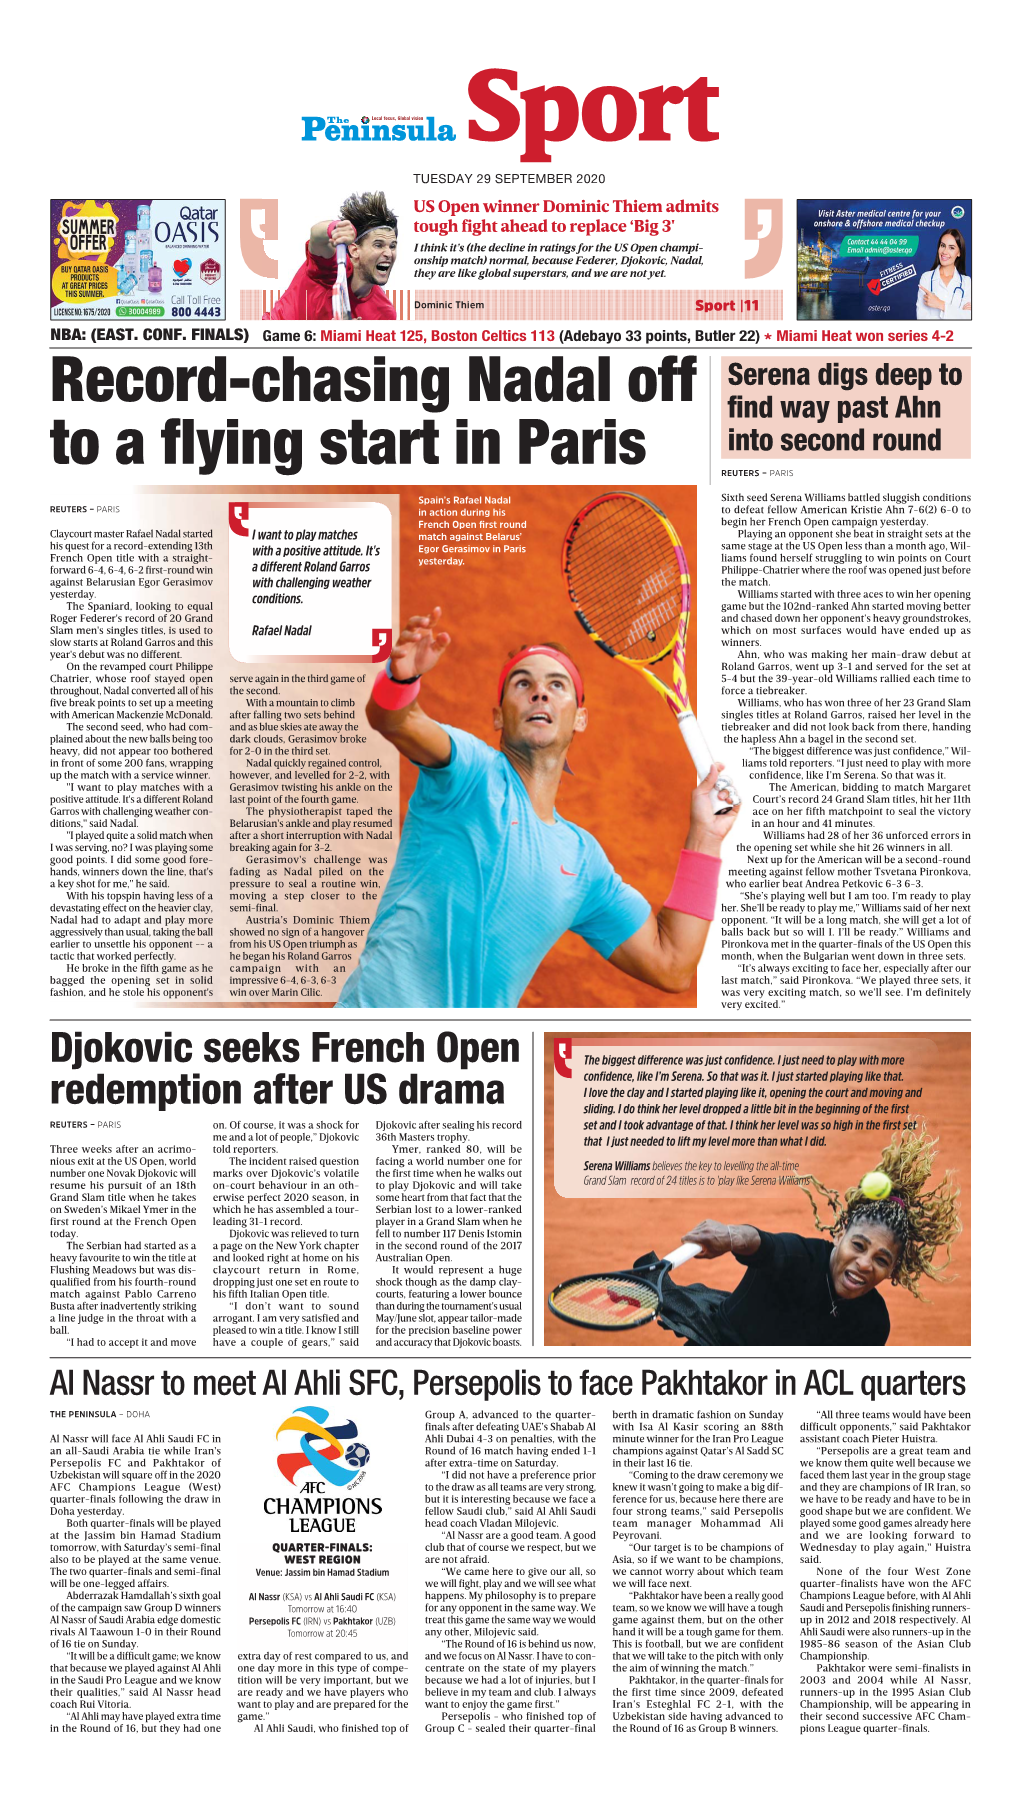 Record-Chasing Nadal Off to a Flying Start in Paris